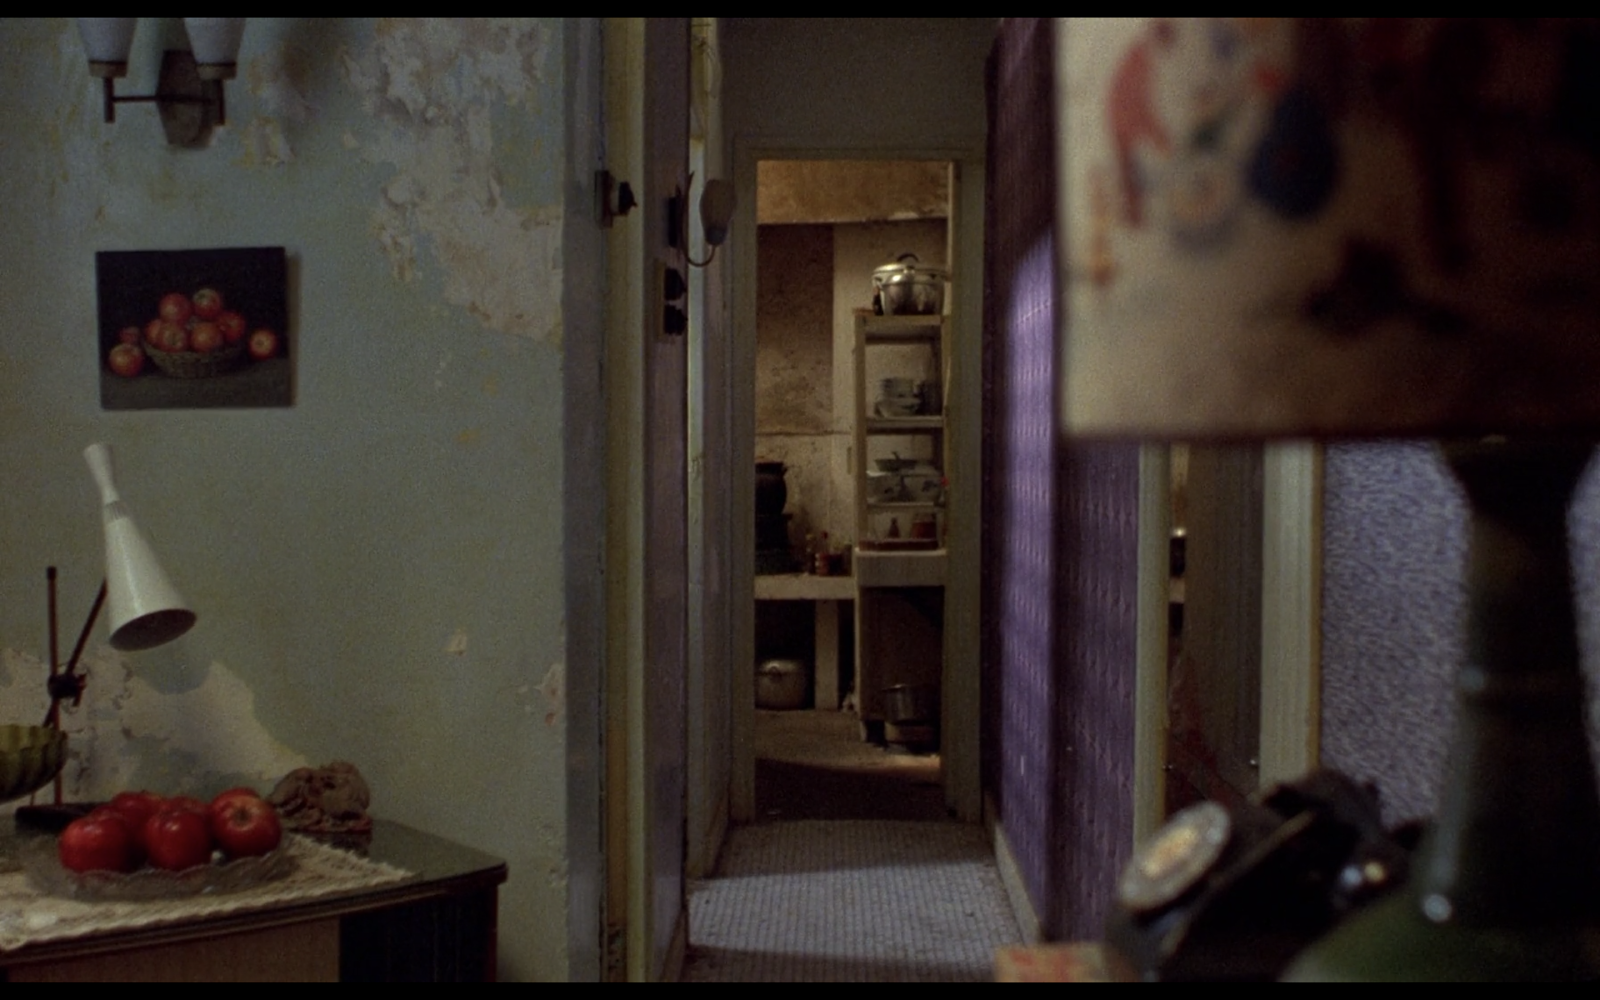 A screen still from the film In the Mood for Love, featuring a look down a narrow hallway of an apartment. No characters are in sight.